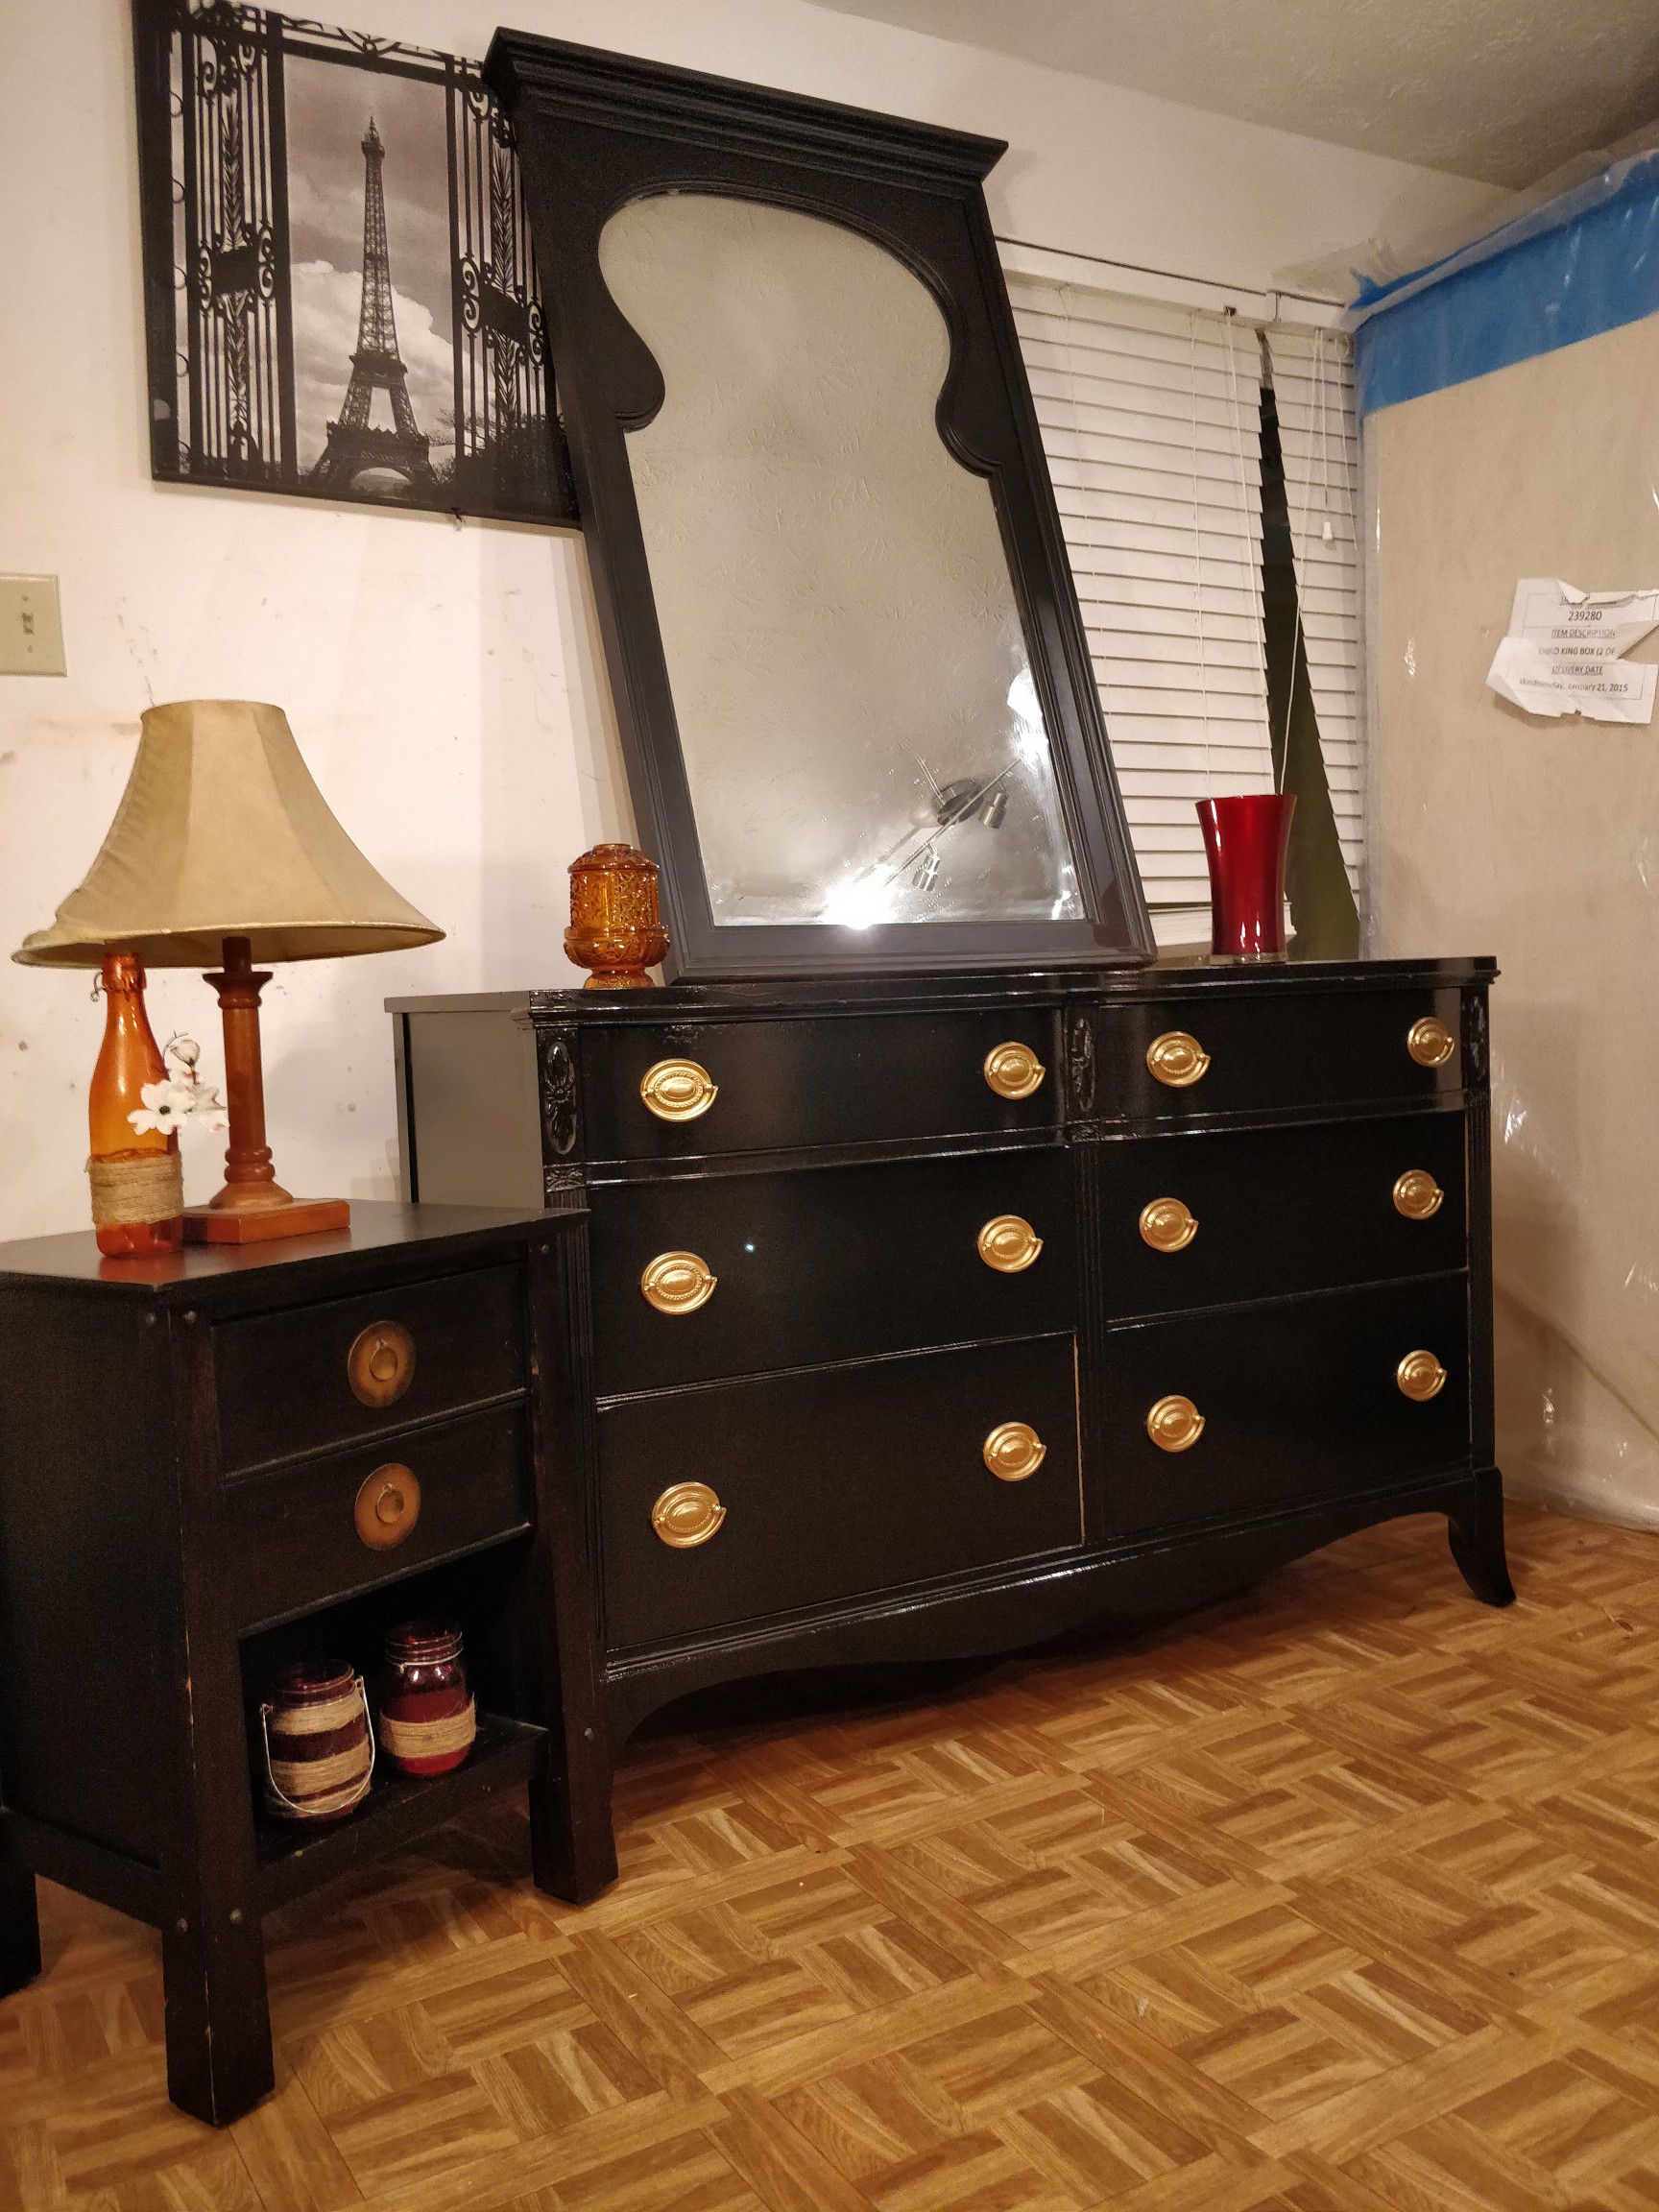 Nice antique black solid wood HUNTLEY FURNITURE dresser with big mirror & night stand in good condition, all drawers working"